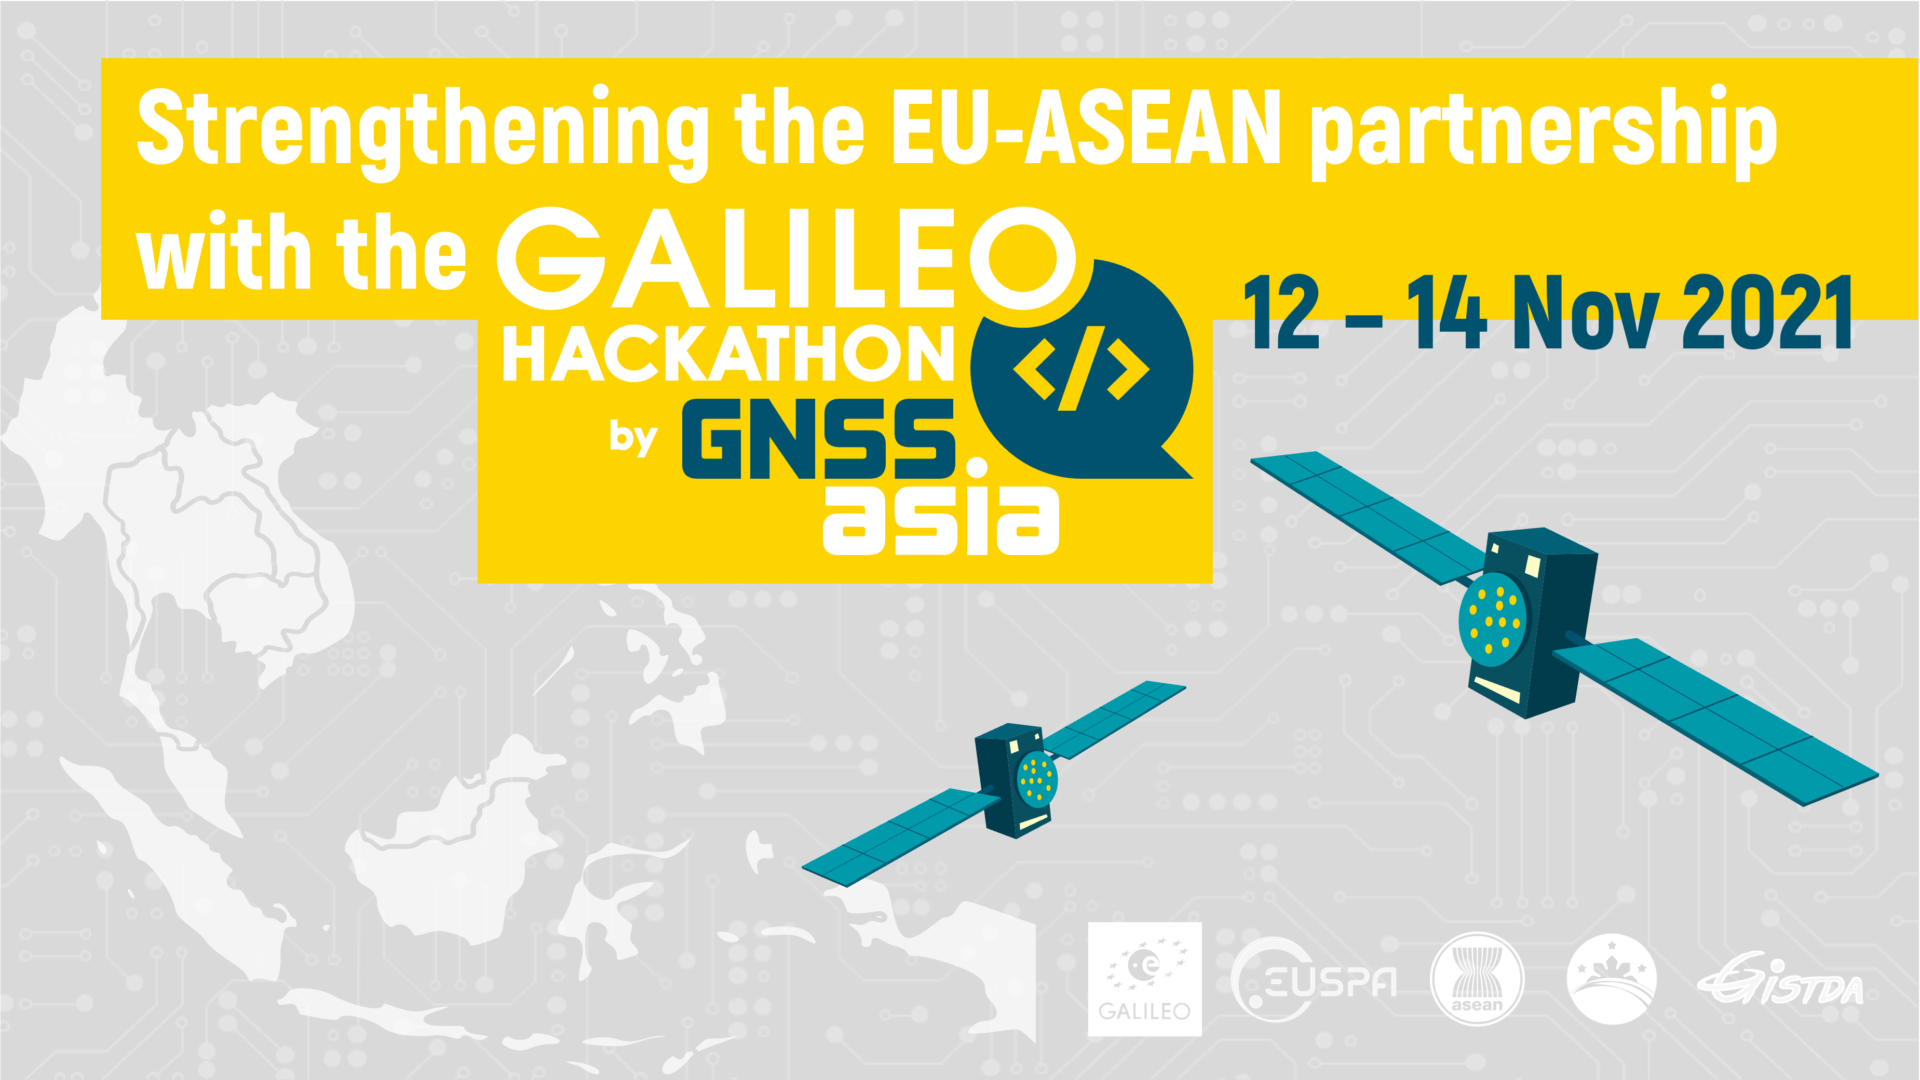 Flashback to the Galileo Hackathons in Southeast Asia